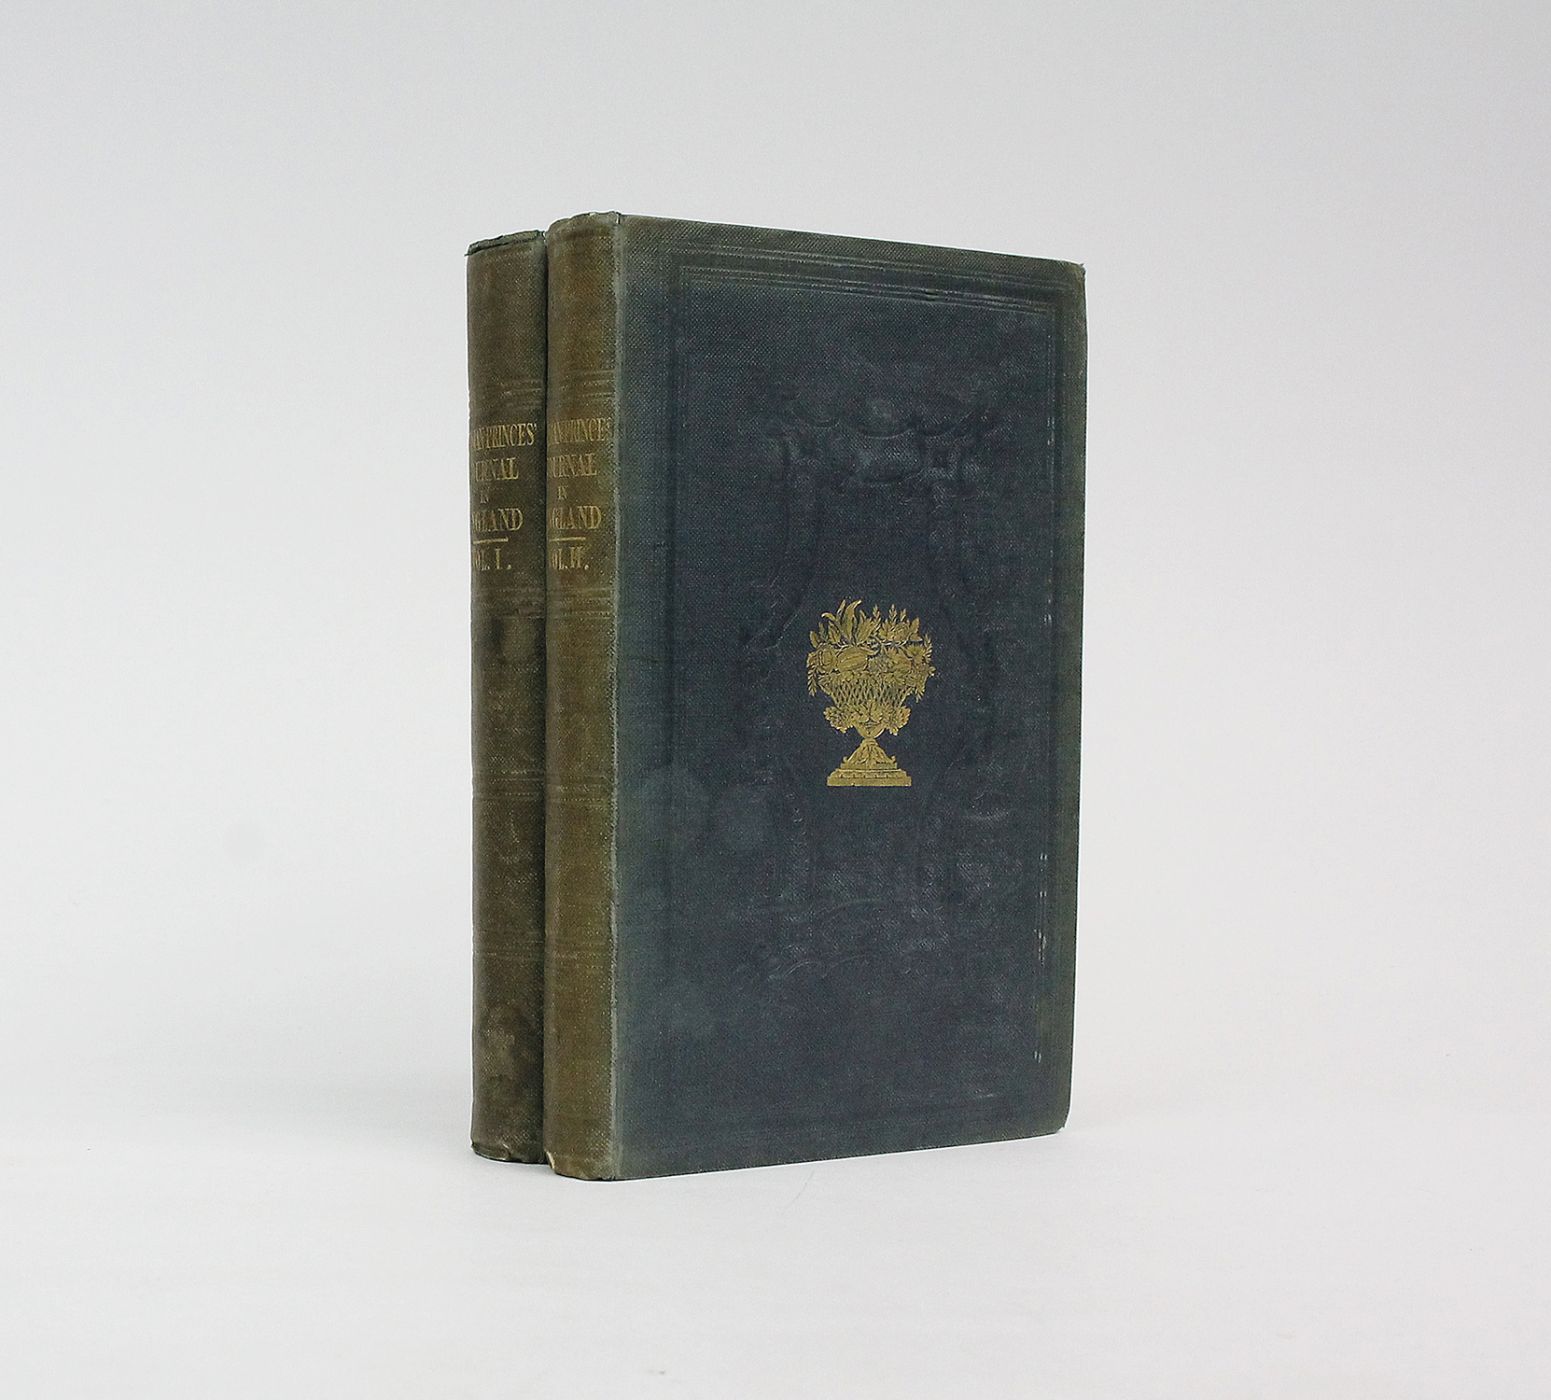 JOURNAL OF A RESIDENCE IN ENGLAND, And of a Journey from and to Syria of Their Royal Highnesses Reeza Koolee Meerza, Najaf Koolee Meerza, and Taymoor Meerza, of Persia. -  image 1